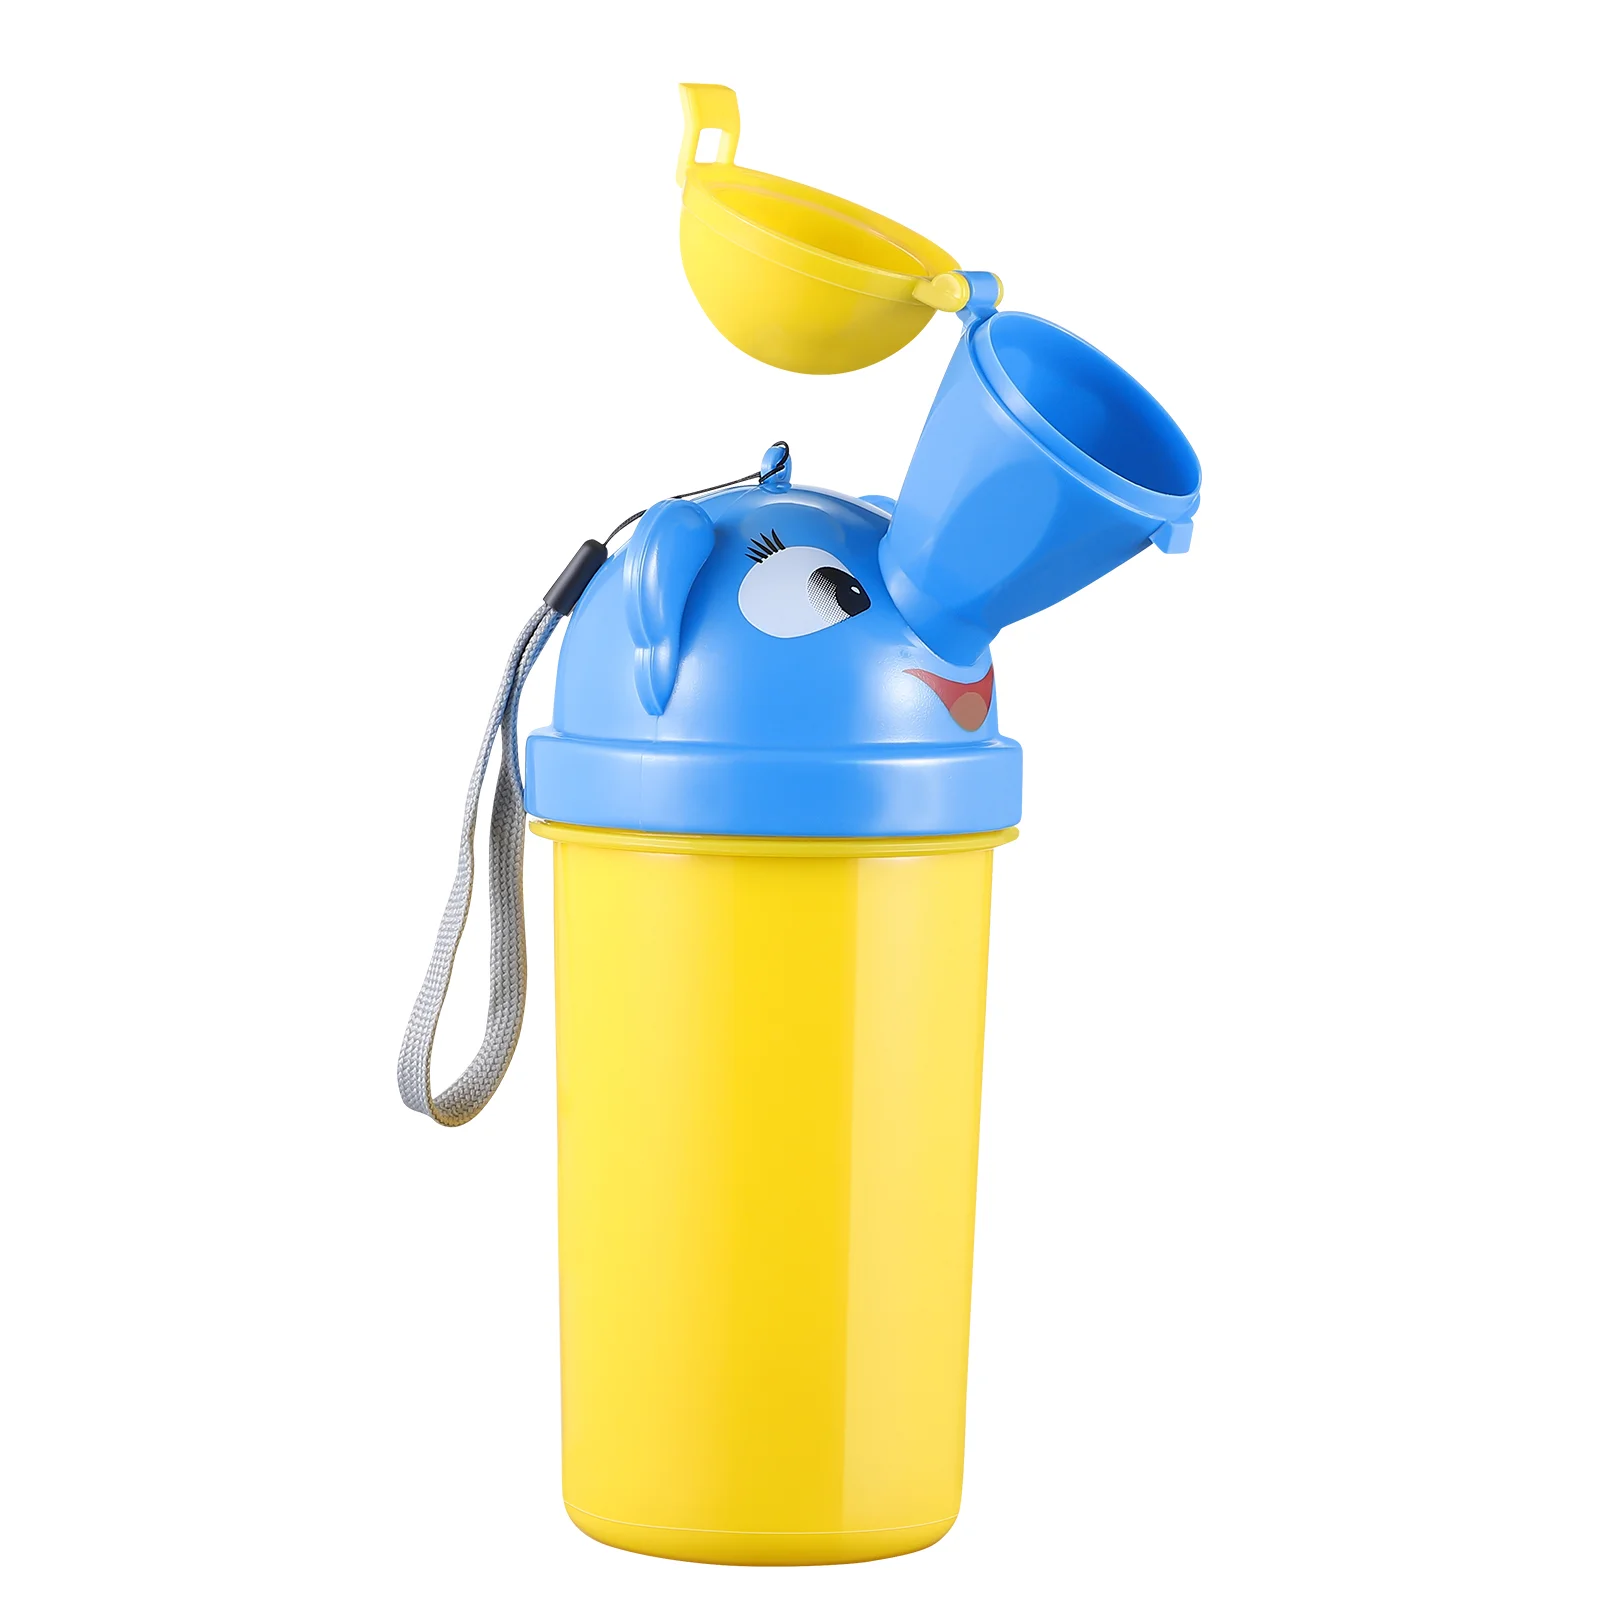 

Baby Urine Car Potty for Toddler Portable Travel Boy Emergency Urinal Cars Toddlers Bottle